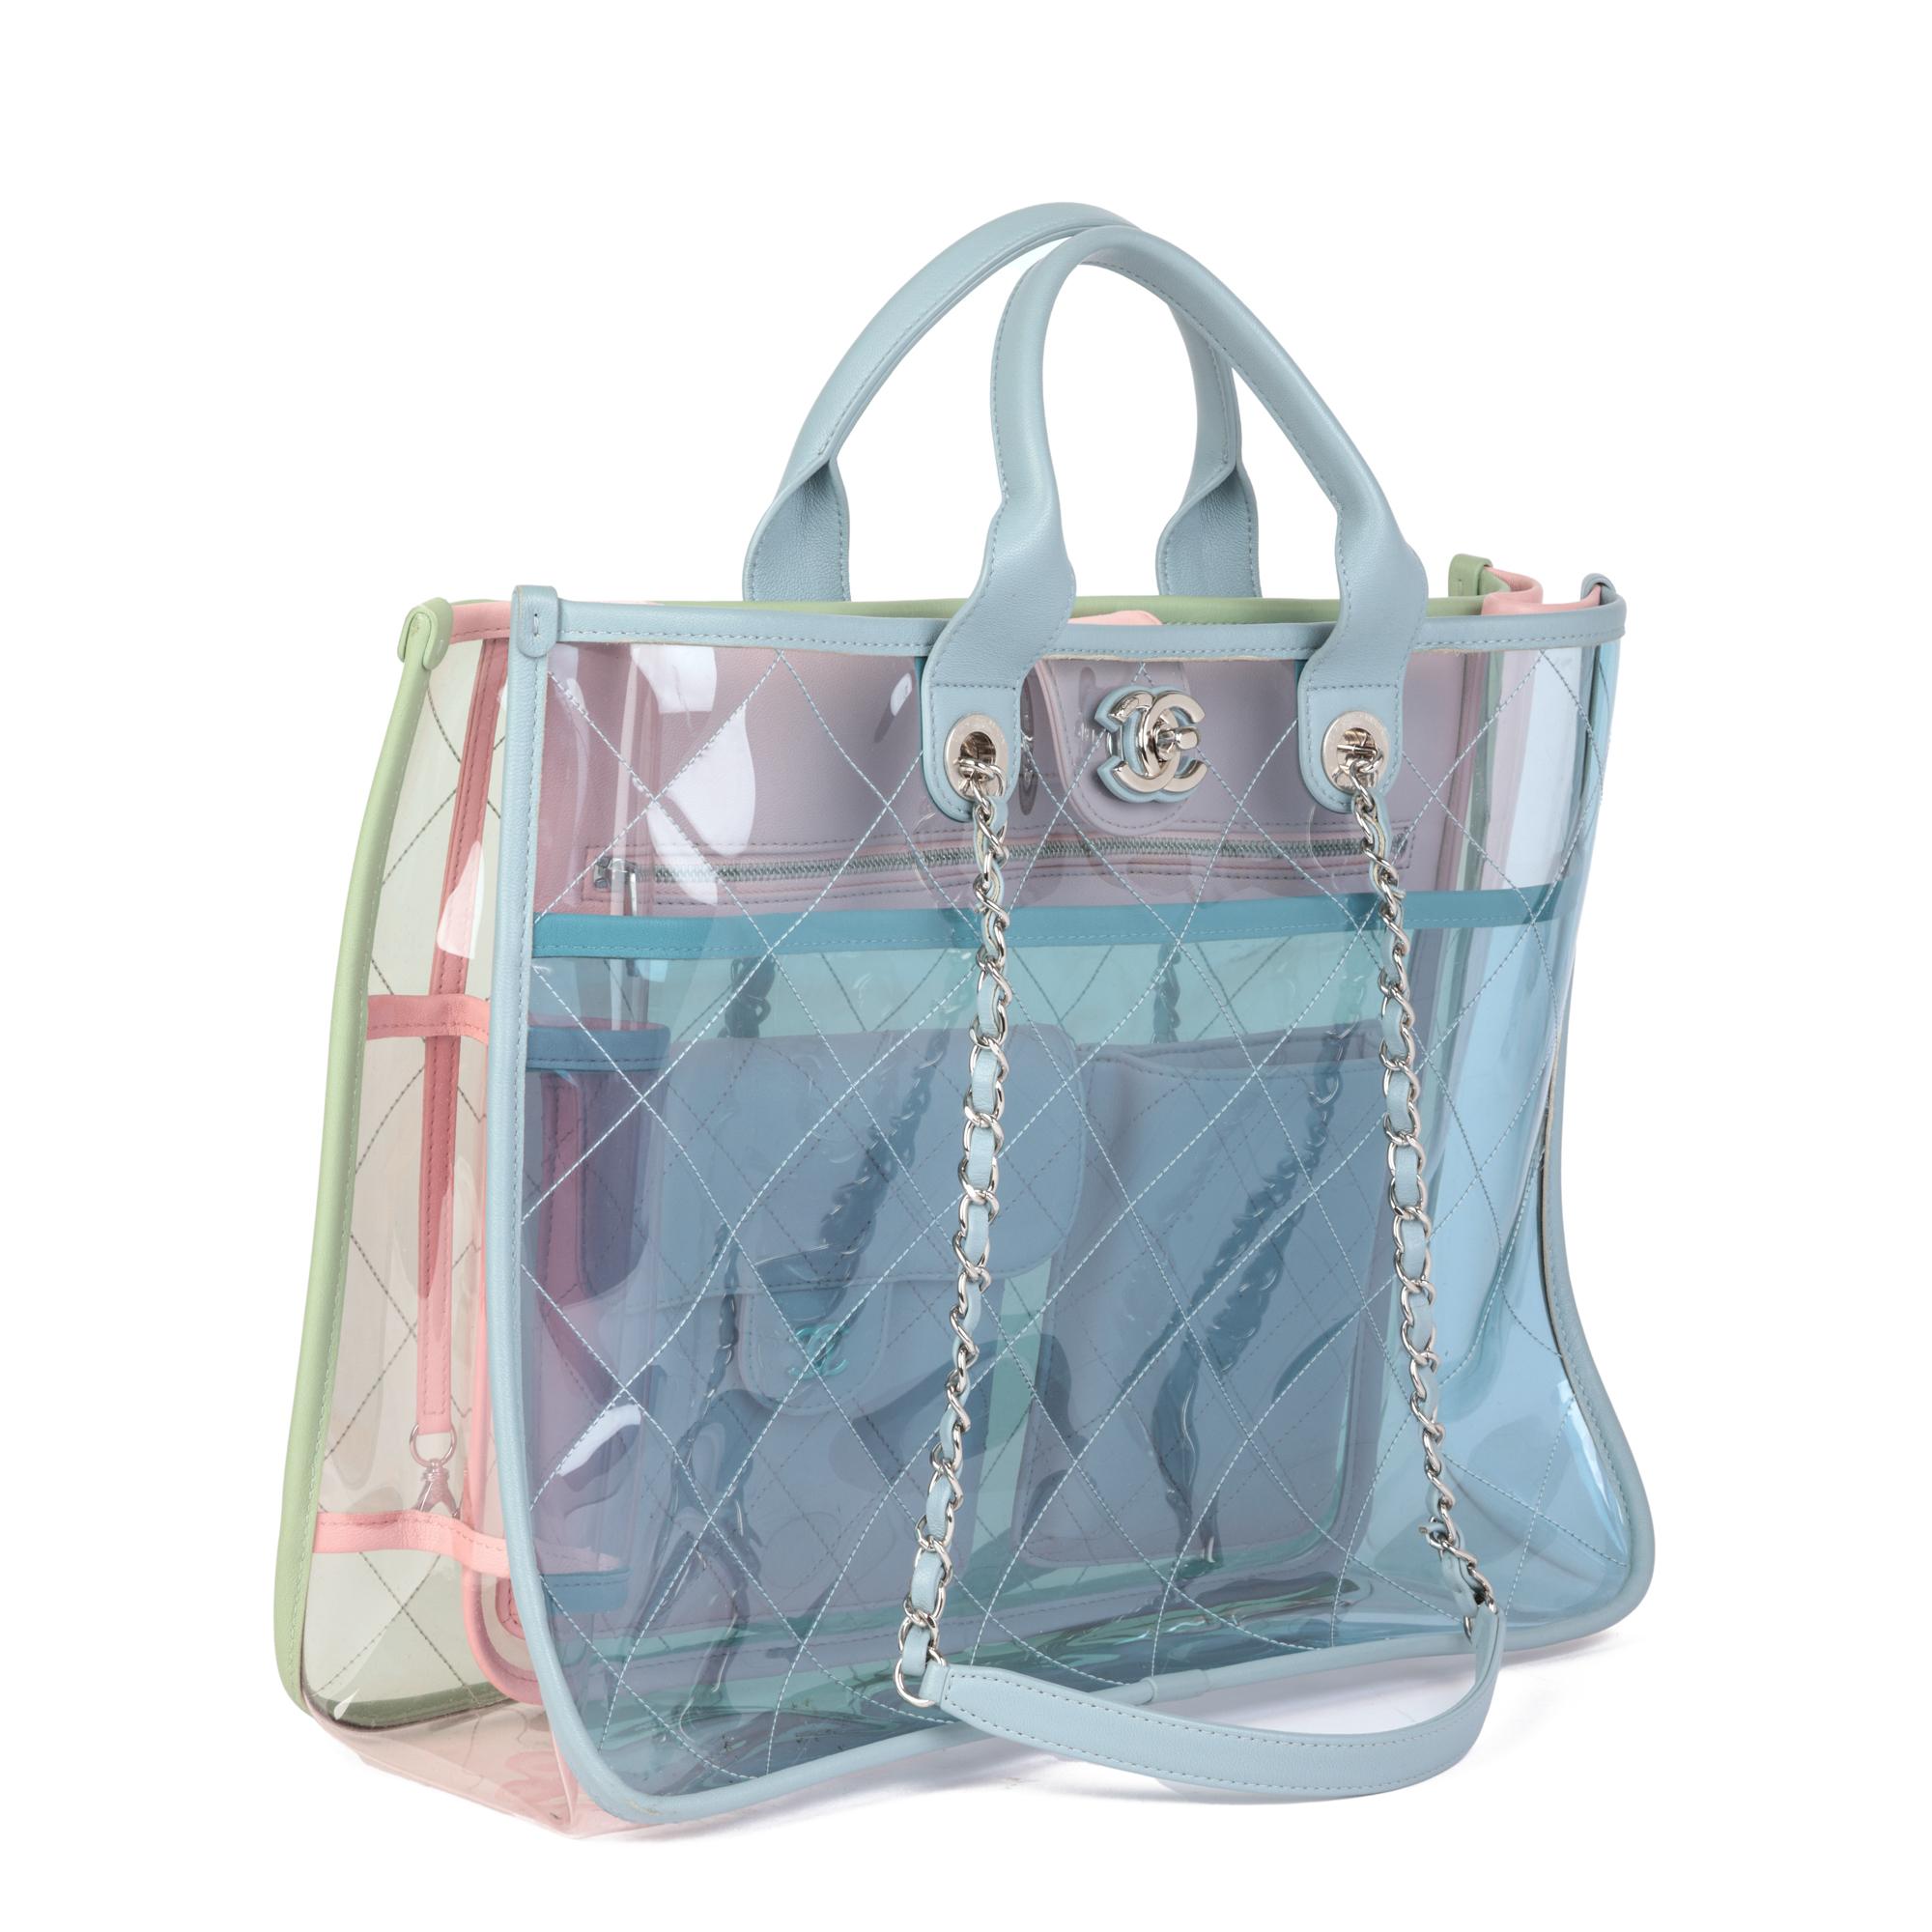 CHANEL
Green, Blue, Pink Lambskin & PVC Coco Splash Large Shopping Tote

Serial Number: 25830709
Age (Circa): 2018
Accompanied By: Chanel Dust Bag, Authenticity Card, Protective Felt
Authenticity Details: Authenticity Card, Serial Sticker (Made in